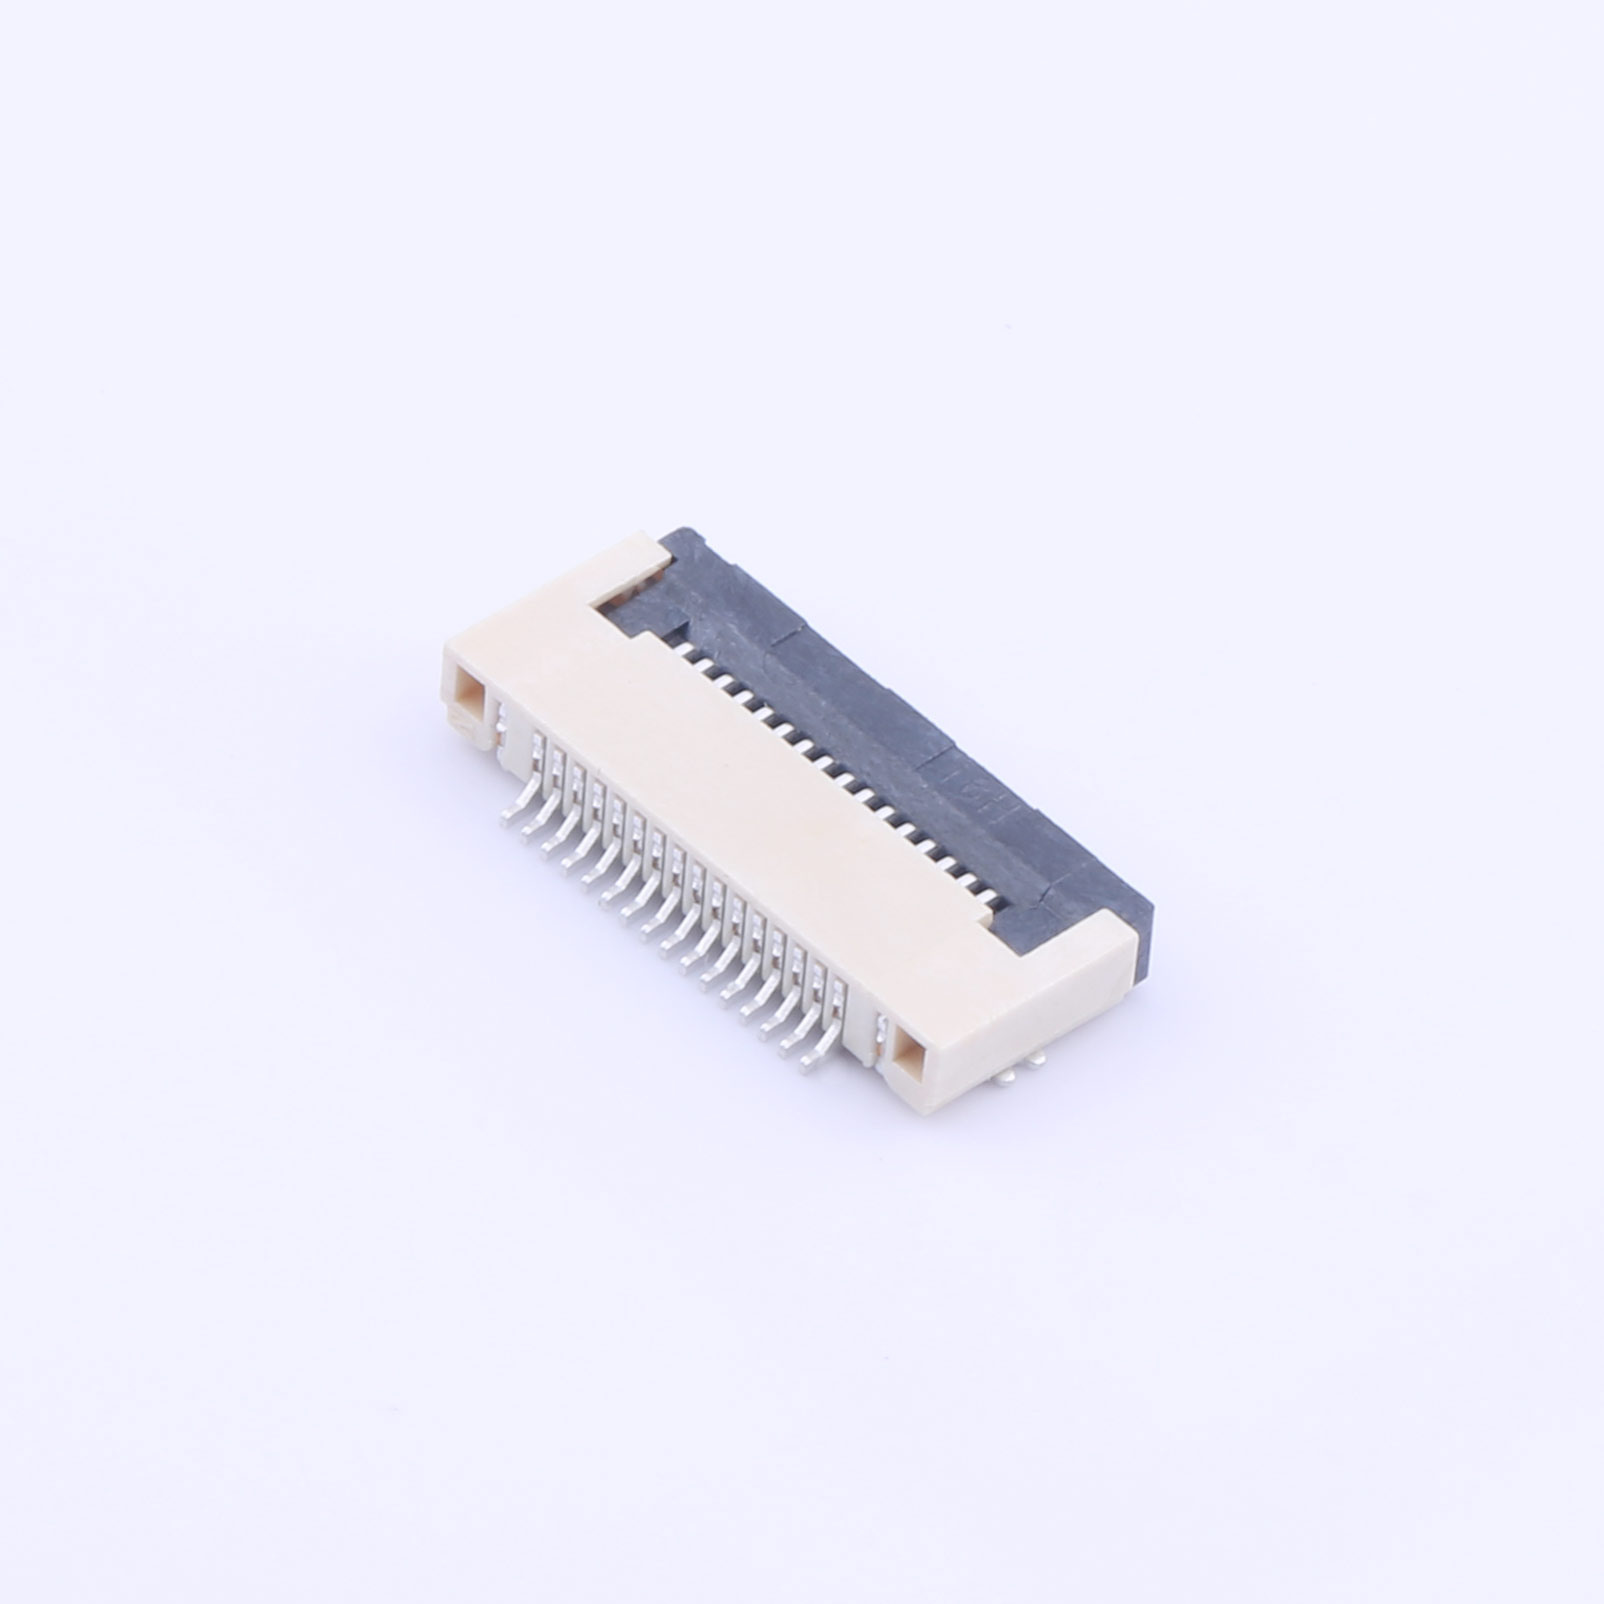 Kinghelm 0.5mm Pitch FPC FFC Connector 16P Height 2mm Front Flip Bottom Contact SMT FPC Connector